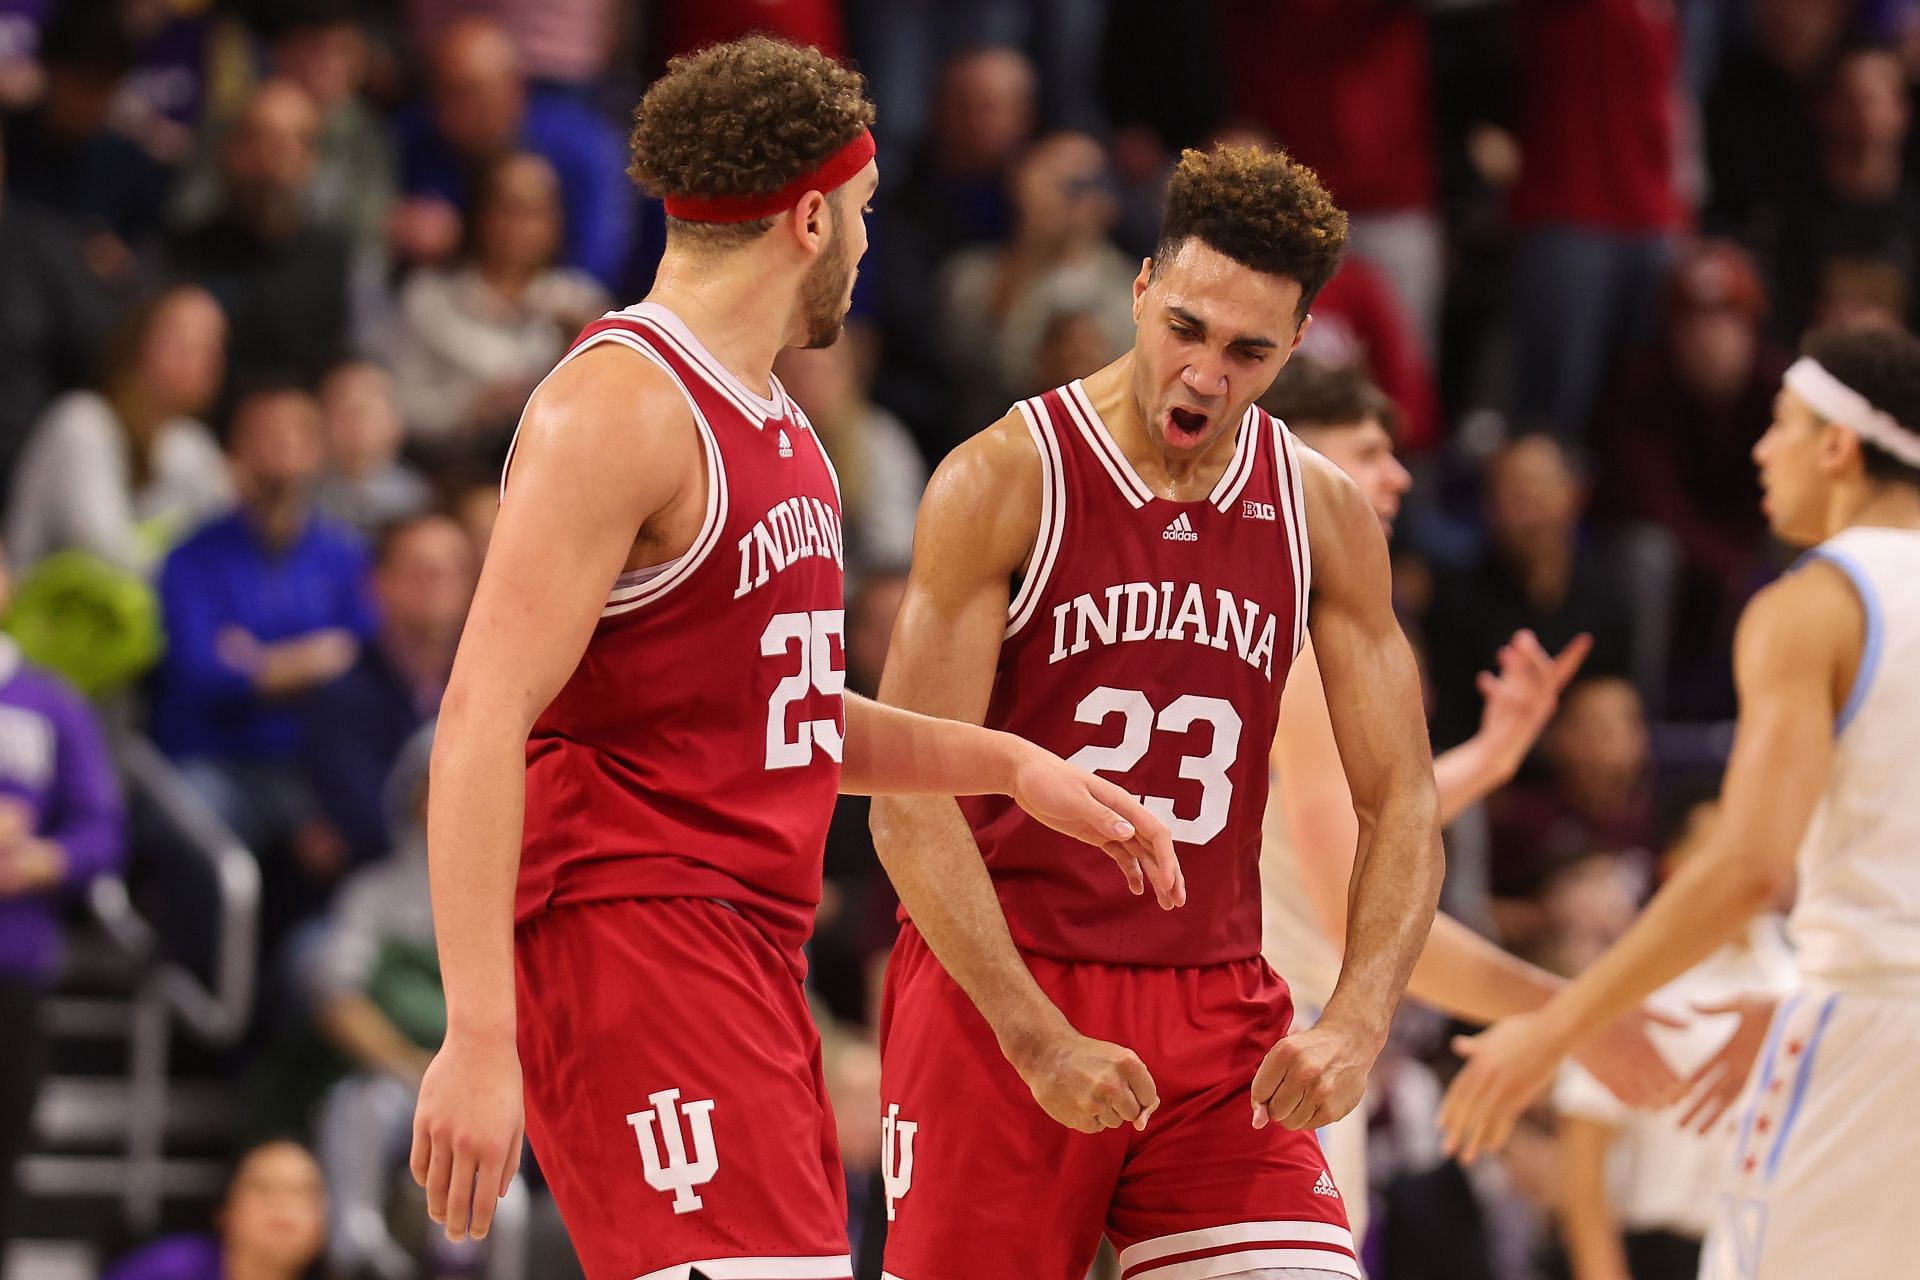 The future looks bright for son of the former Indiana Pacer.